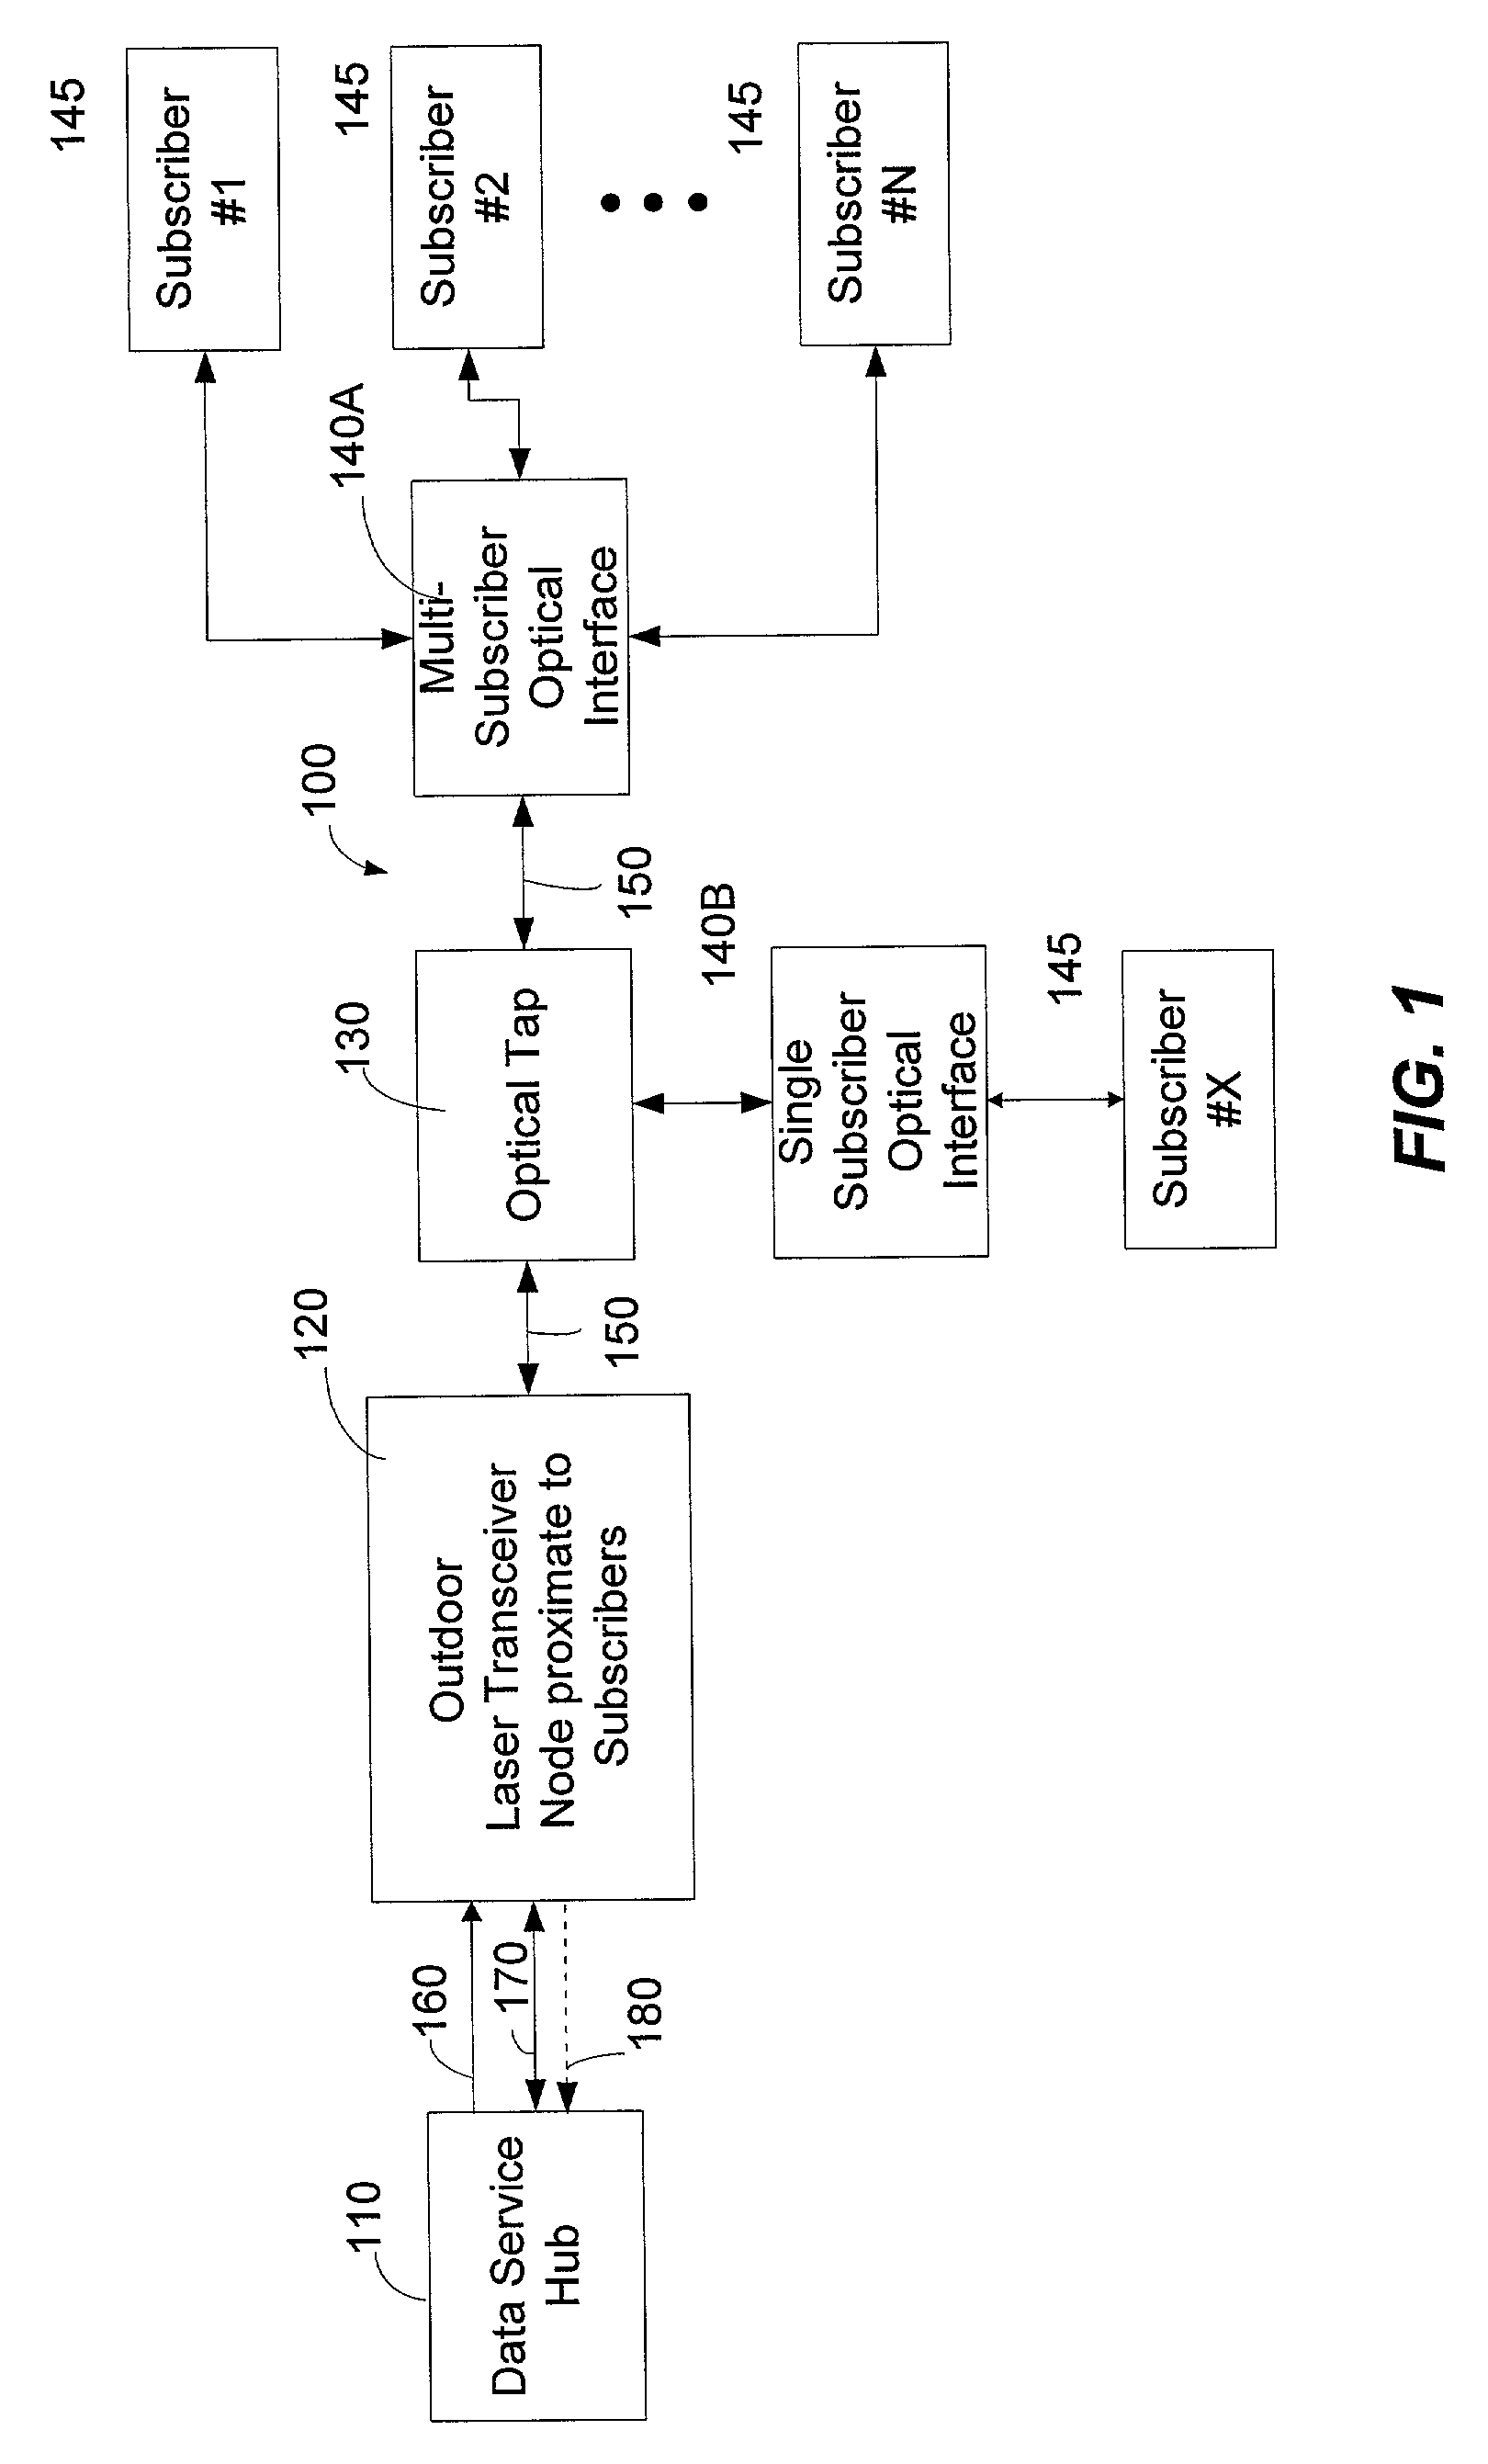 System and method for communicating optical signals to multiple subscribers having various bandwidth demands connected to the same optical waveguide